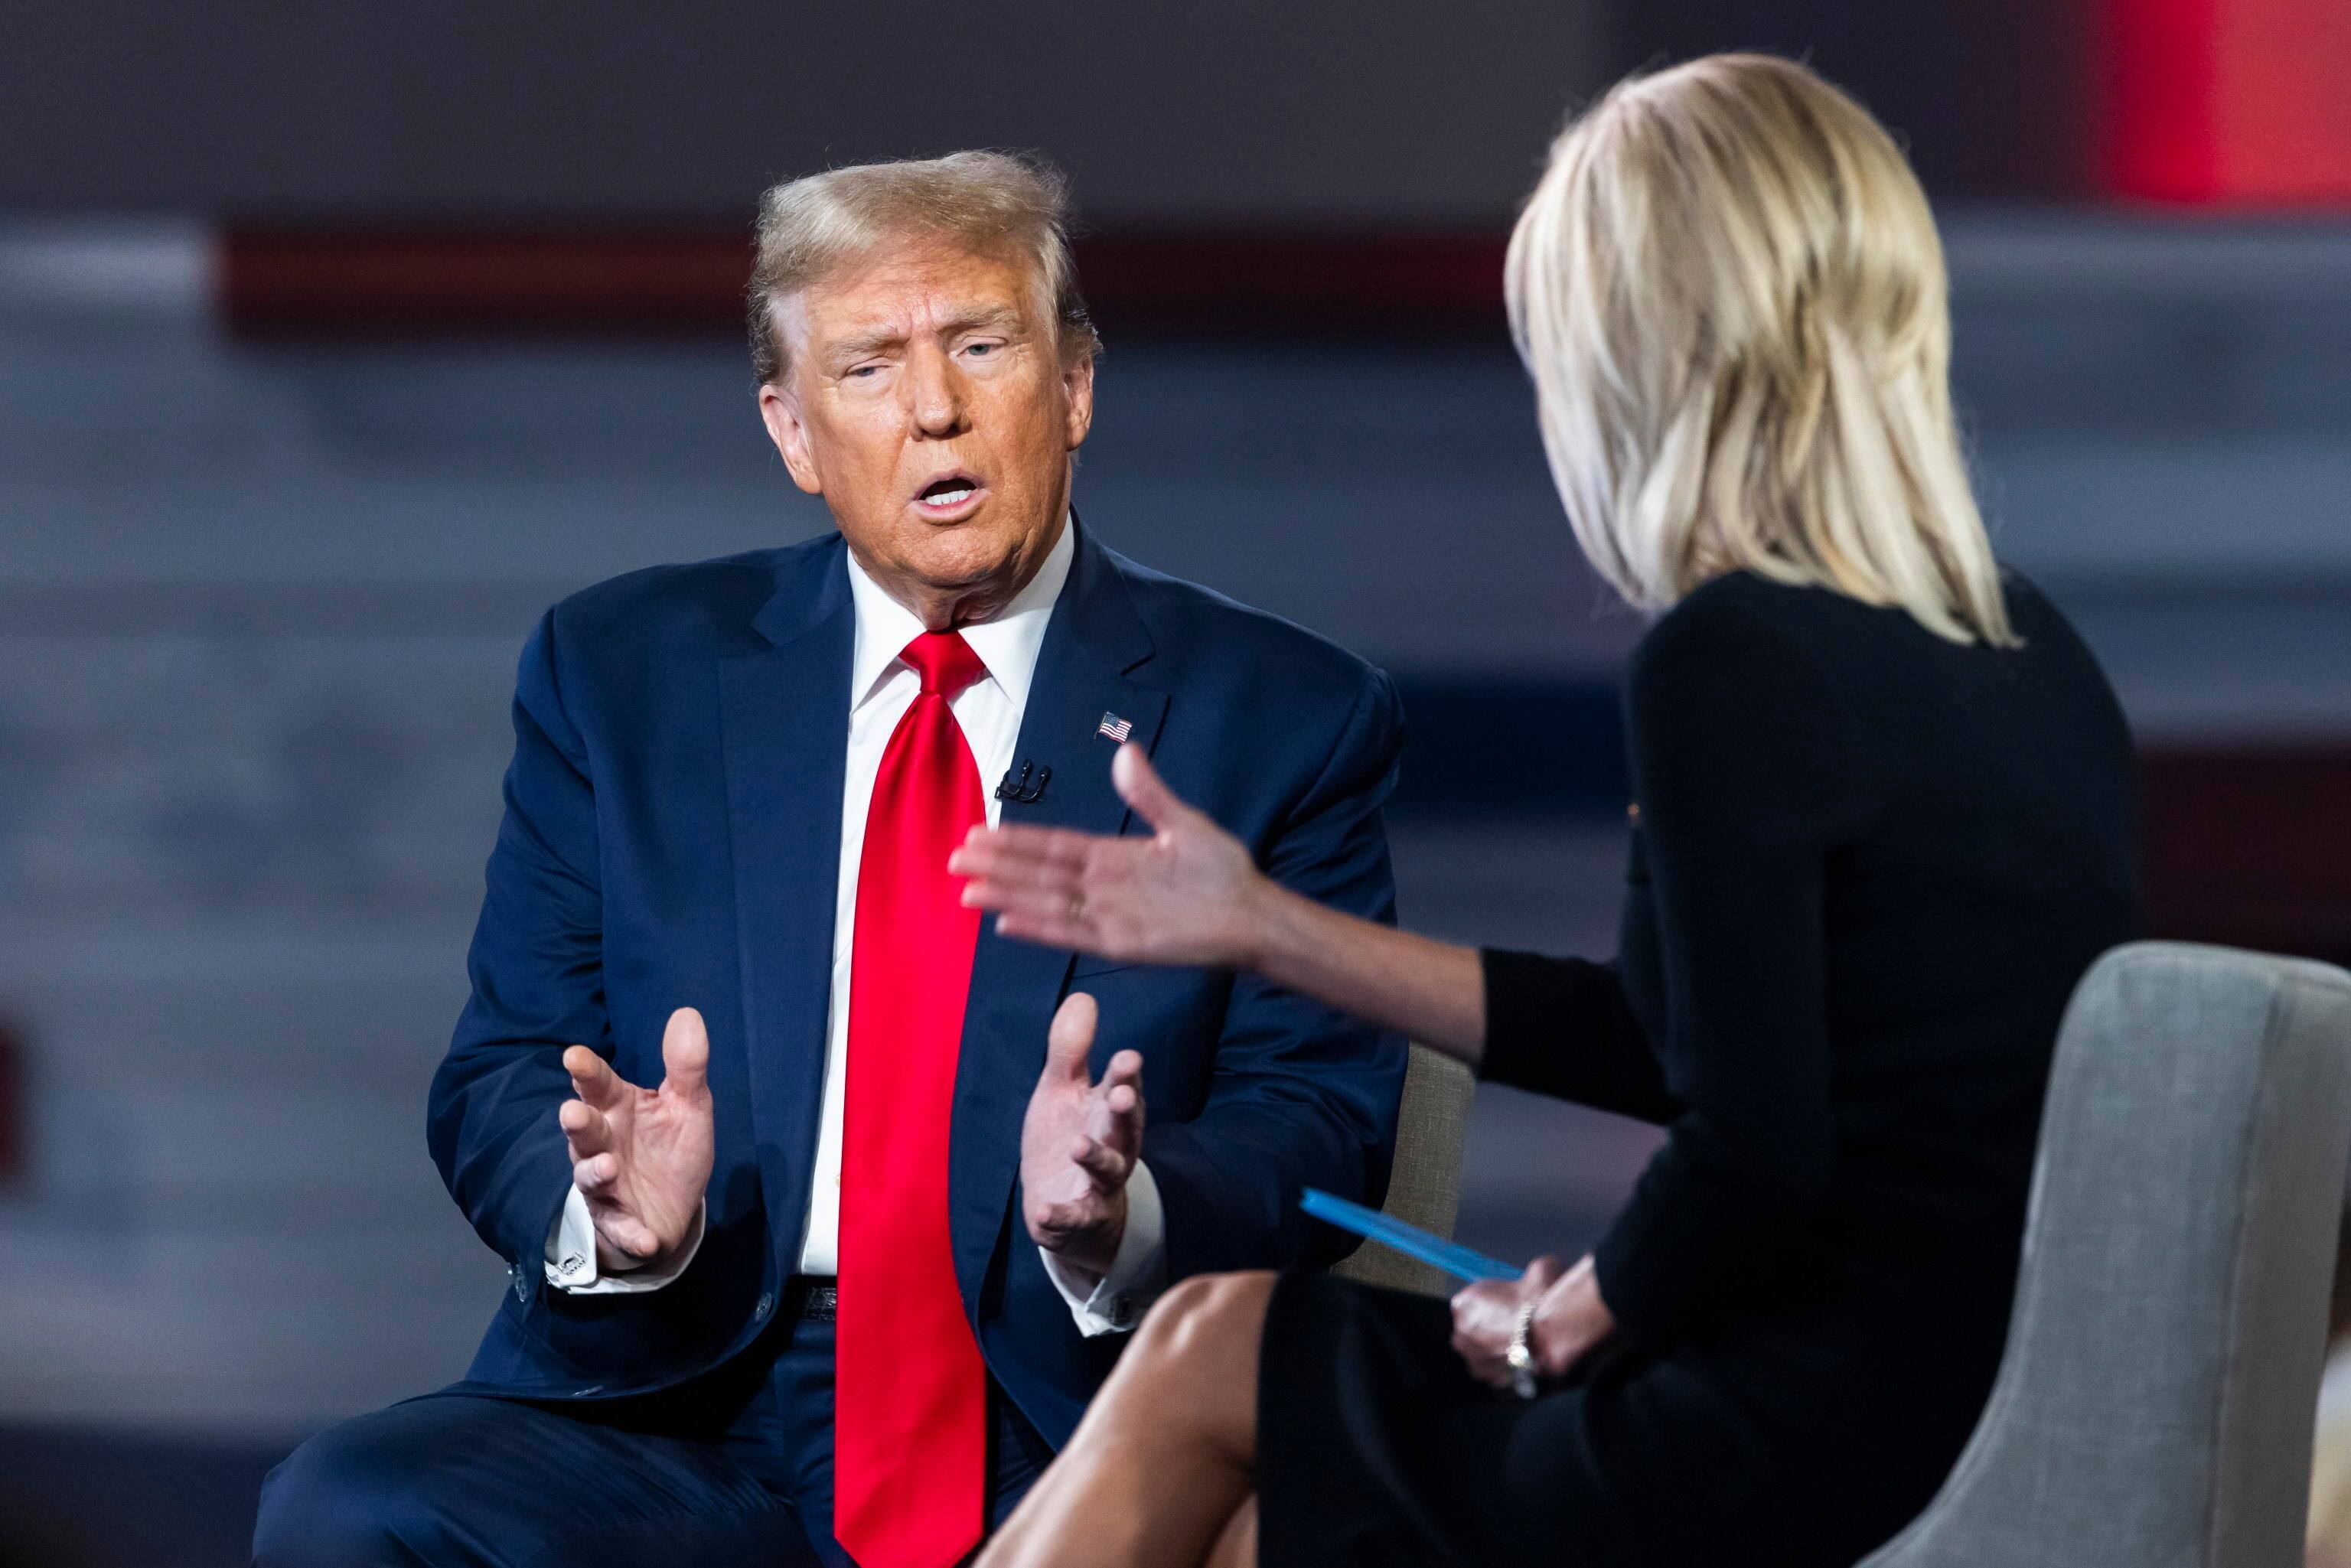 epa11168822 Former US President and current Republican presidential candidate Donald Trump (L) speaks to Fox News host Laura Ingraham (R) during a Fox News town hall in Greenville, South Carolina, USA, 20 February 2024.  Trump is running against former South Carolina governor Nikki Haley in the South Carolina Republican presidential primary, scheduled for 24 February 2024.  EPA/JIM LO SCALZO